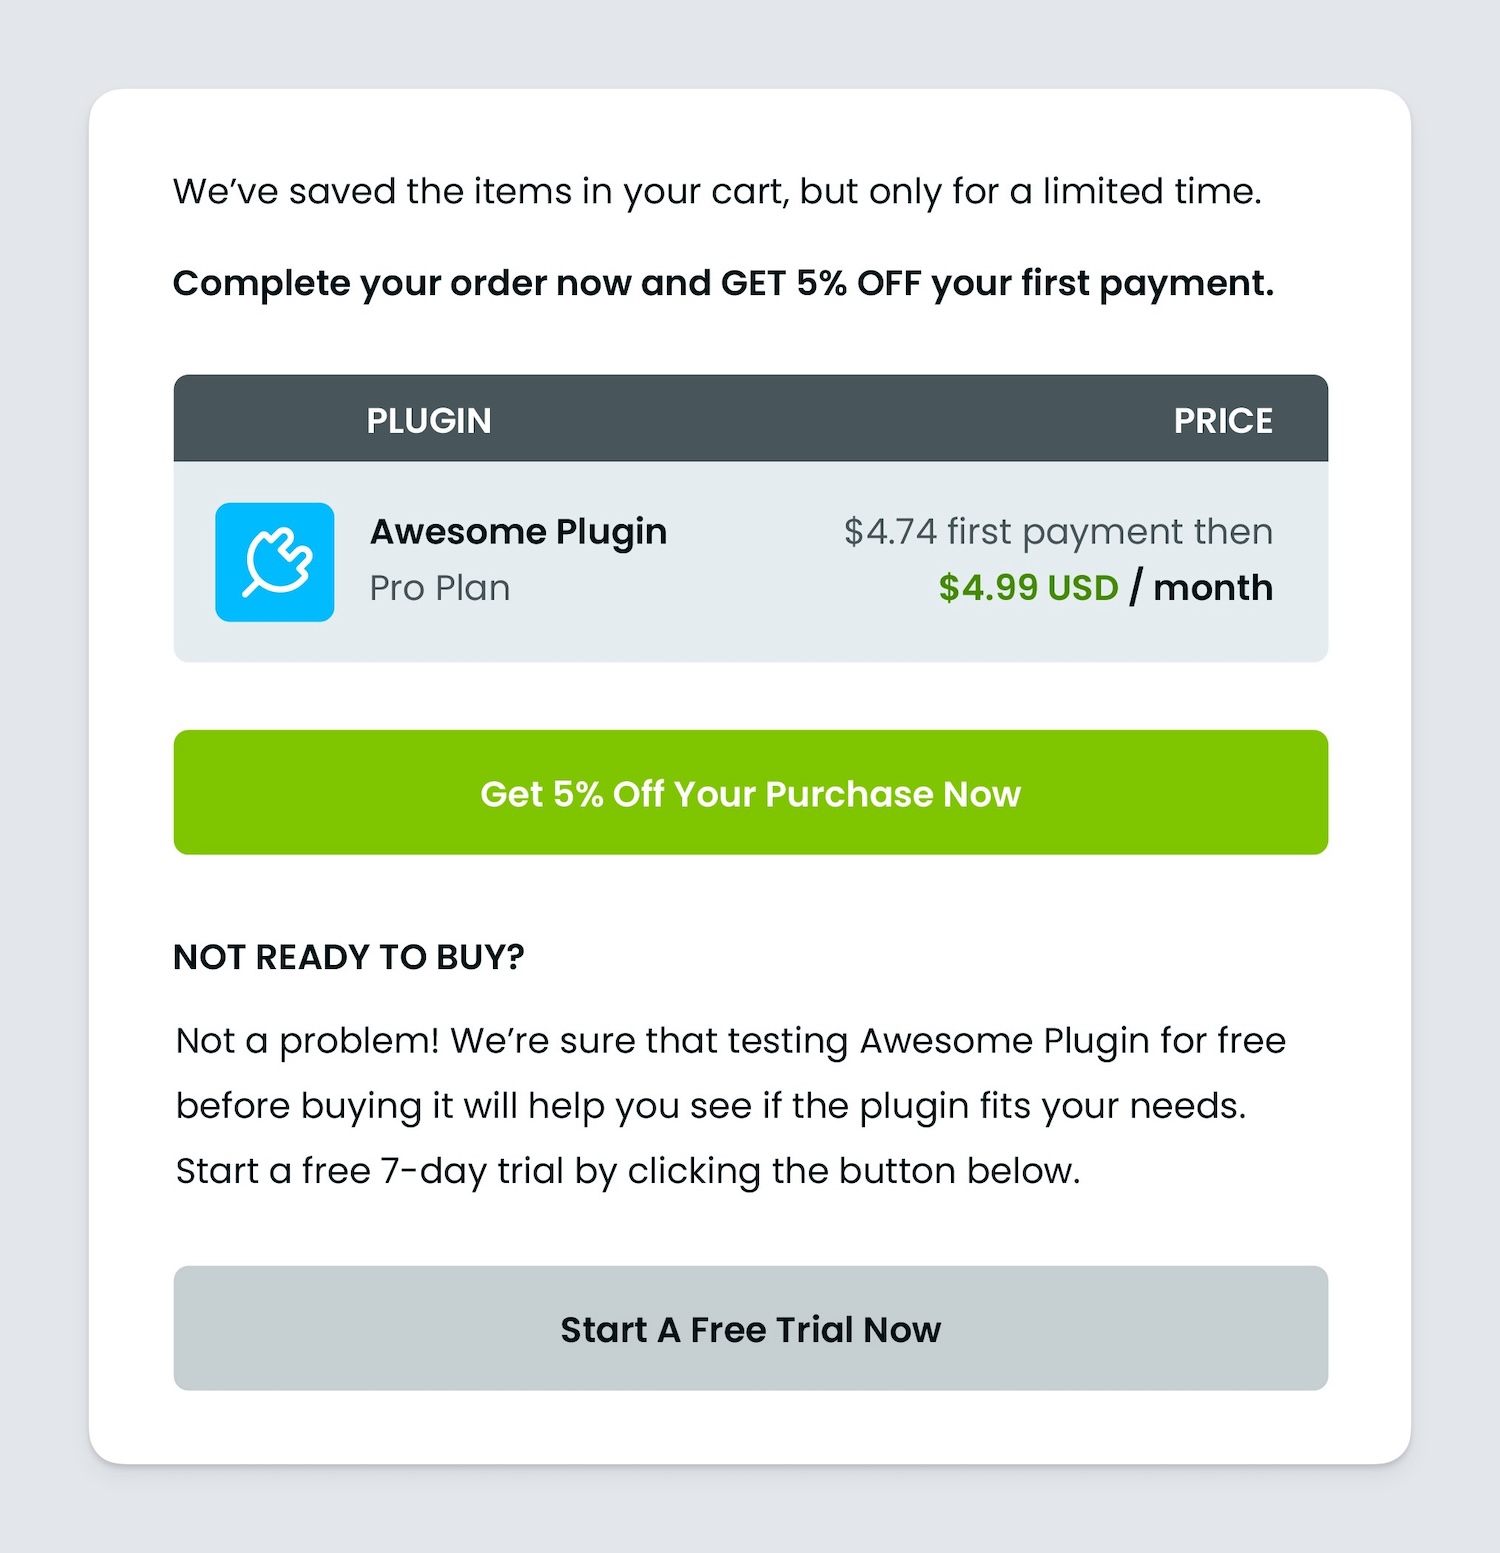 Freemius Cart Abandonment Recovery Email With Discount to Reduce Customer Churn